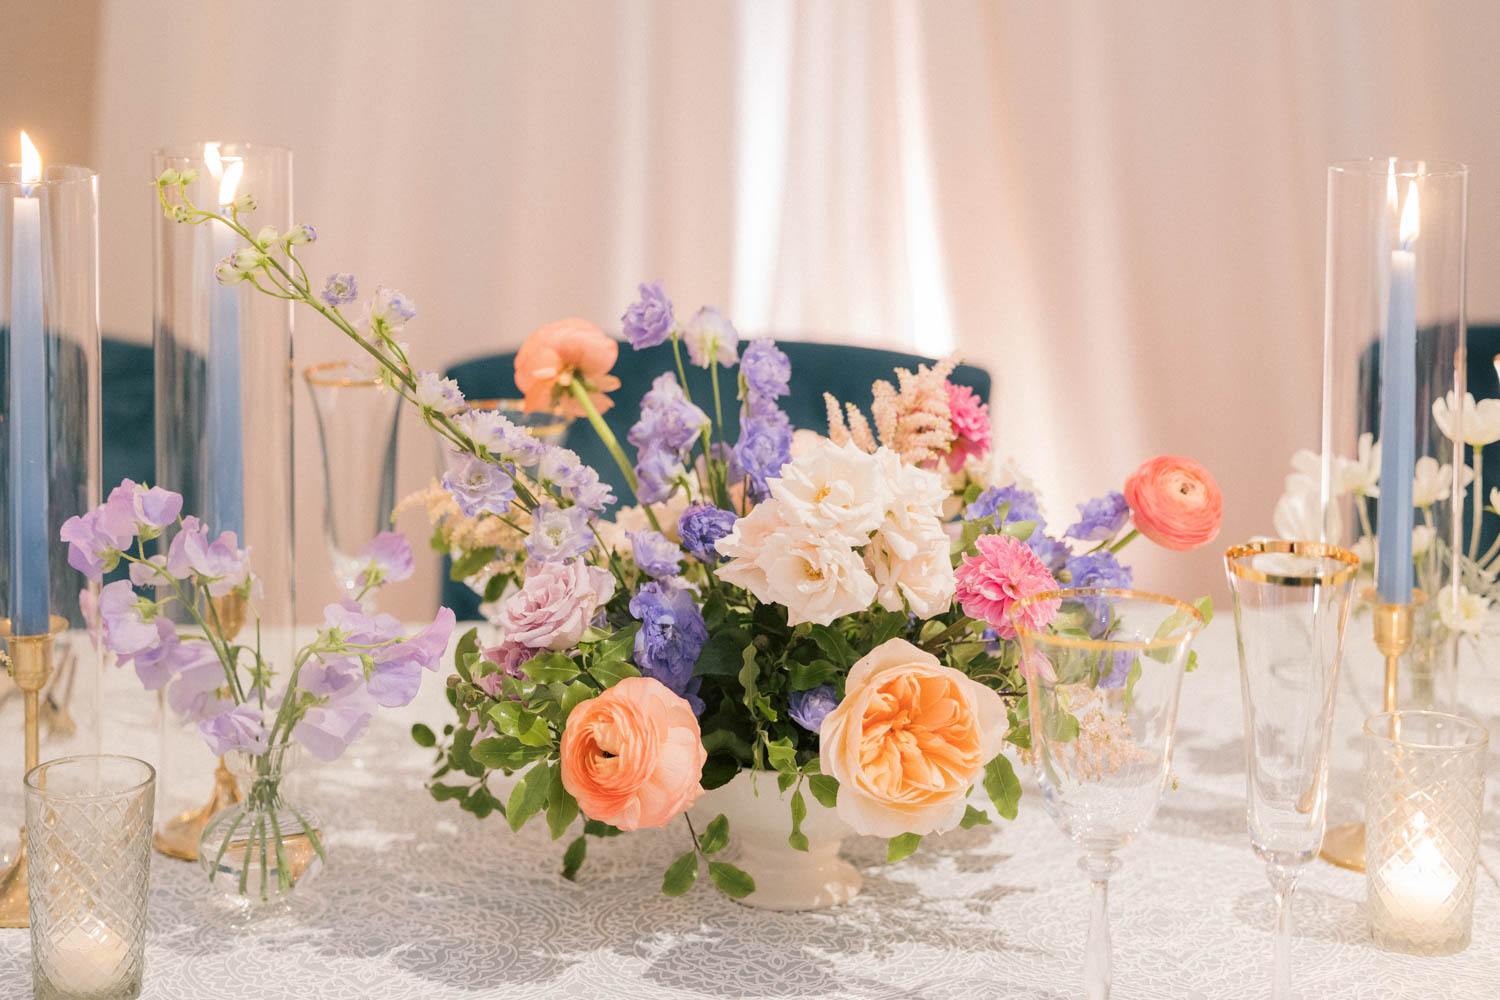 A beautiful wedding floral arrangement paired with blue tapered candles